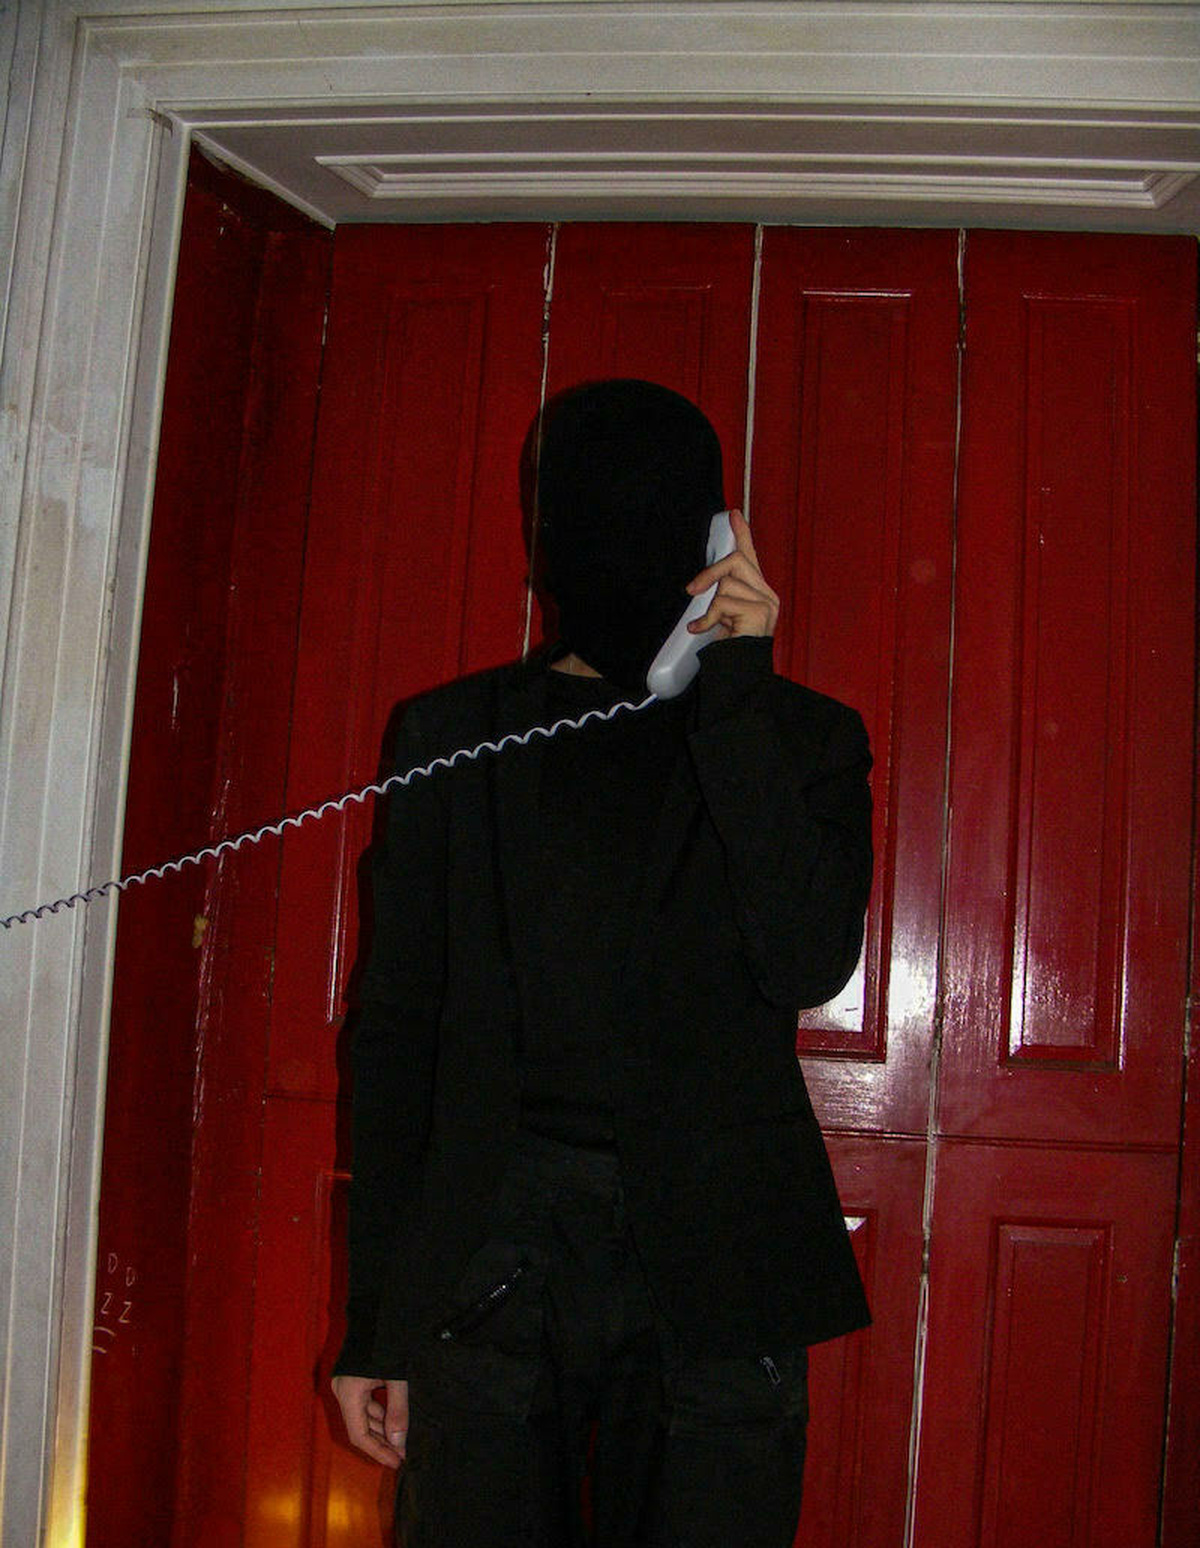 HUSS Stood in front of a red door, wearing an all black body suit holding a white corded phone to his ear.